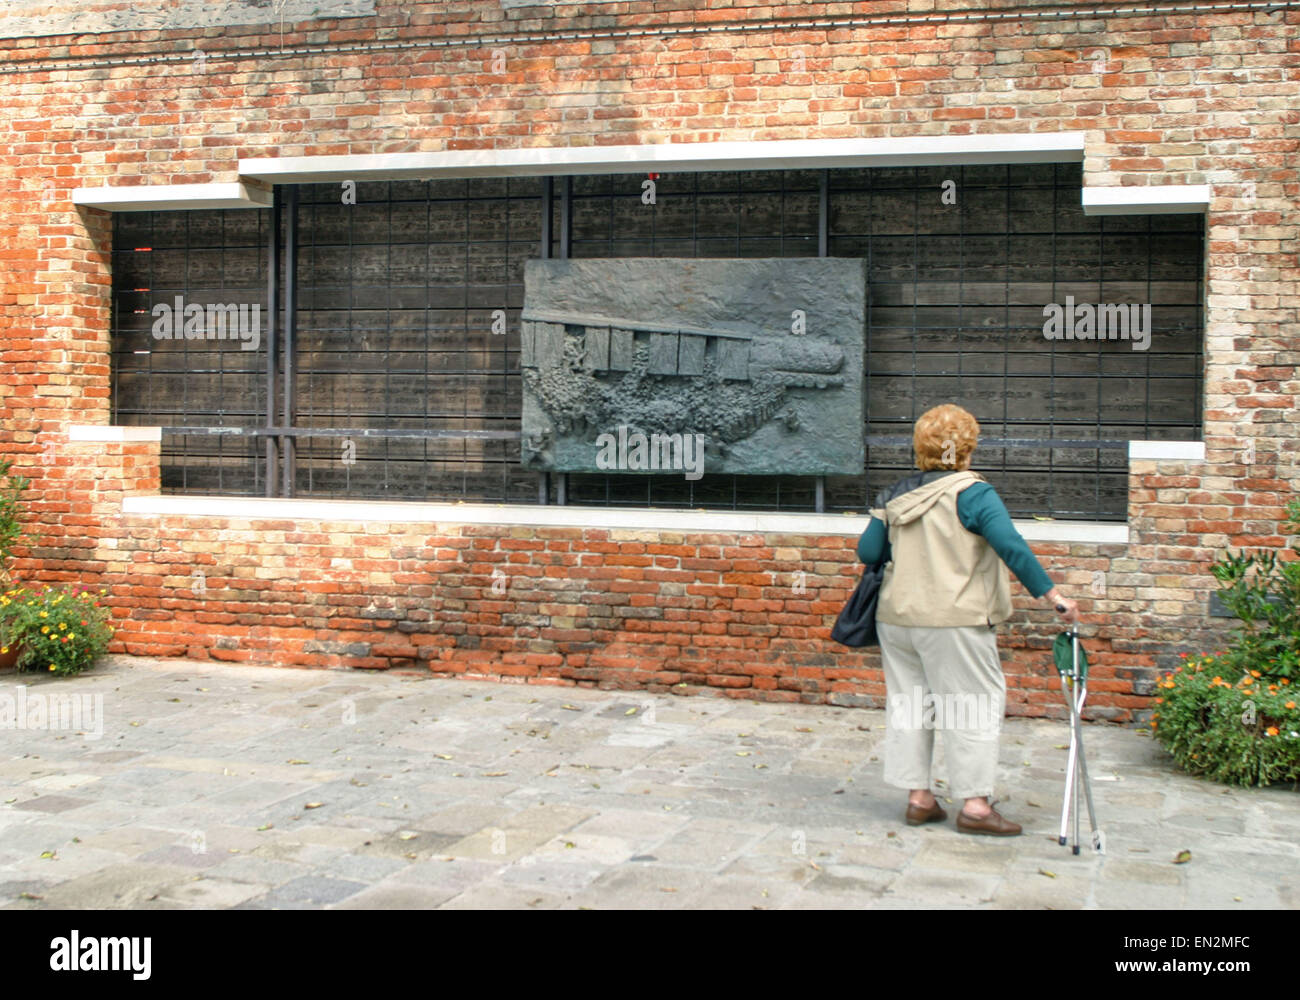 Venice, Province of Venice, ITALY. 7th Oct, 2004. A woman tourist stops to look at one of the Holocaust Memorials in the Campo del Nuovo Ghetto. In a cutout section of brick wall is a bronze bas-relief panel depicting The Last Train, with the names and ages of Venetian Jews killed by the Germans inside and behind it. Created by Arbit Blatas, a Lithuanian-born artist who lost his mother in the Holocaust, it was dedicated in 1993. Venice, a UNESCO World Heritage Site, is one of the most popular international tourist destinations. © Arnold Drapkin/ZUMA Wire/Alamy Live News Stock Photo